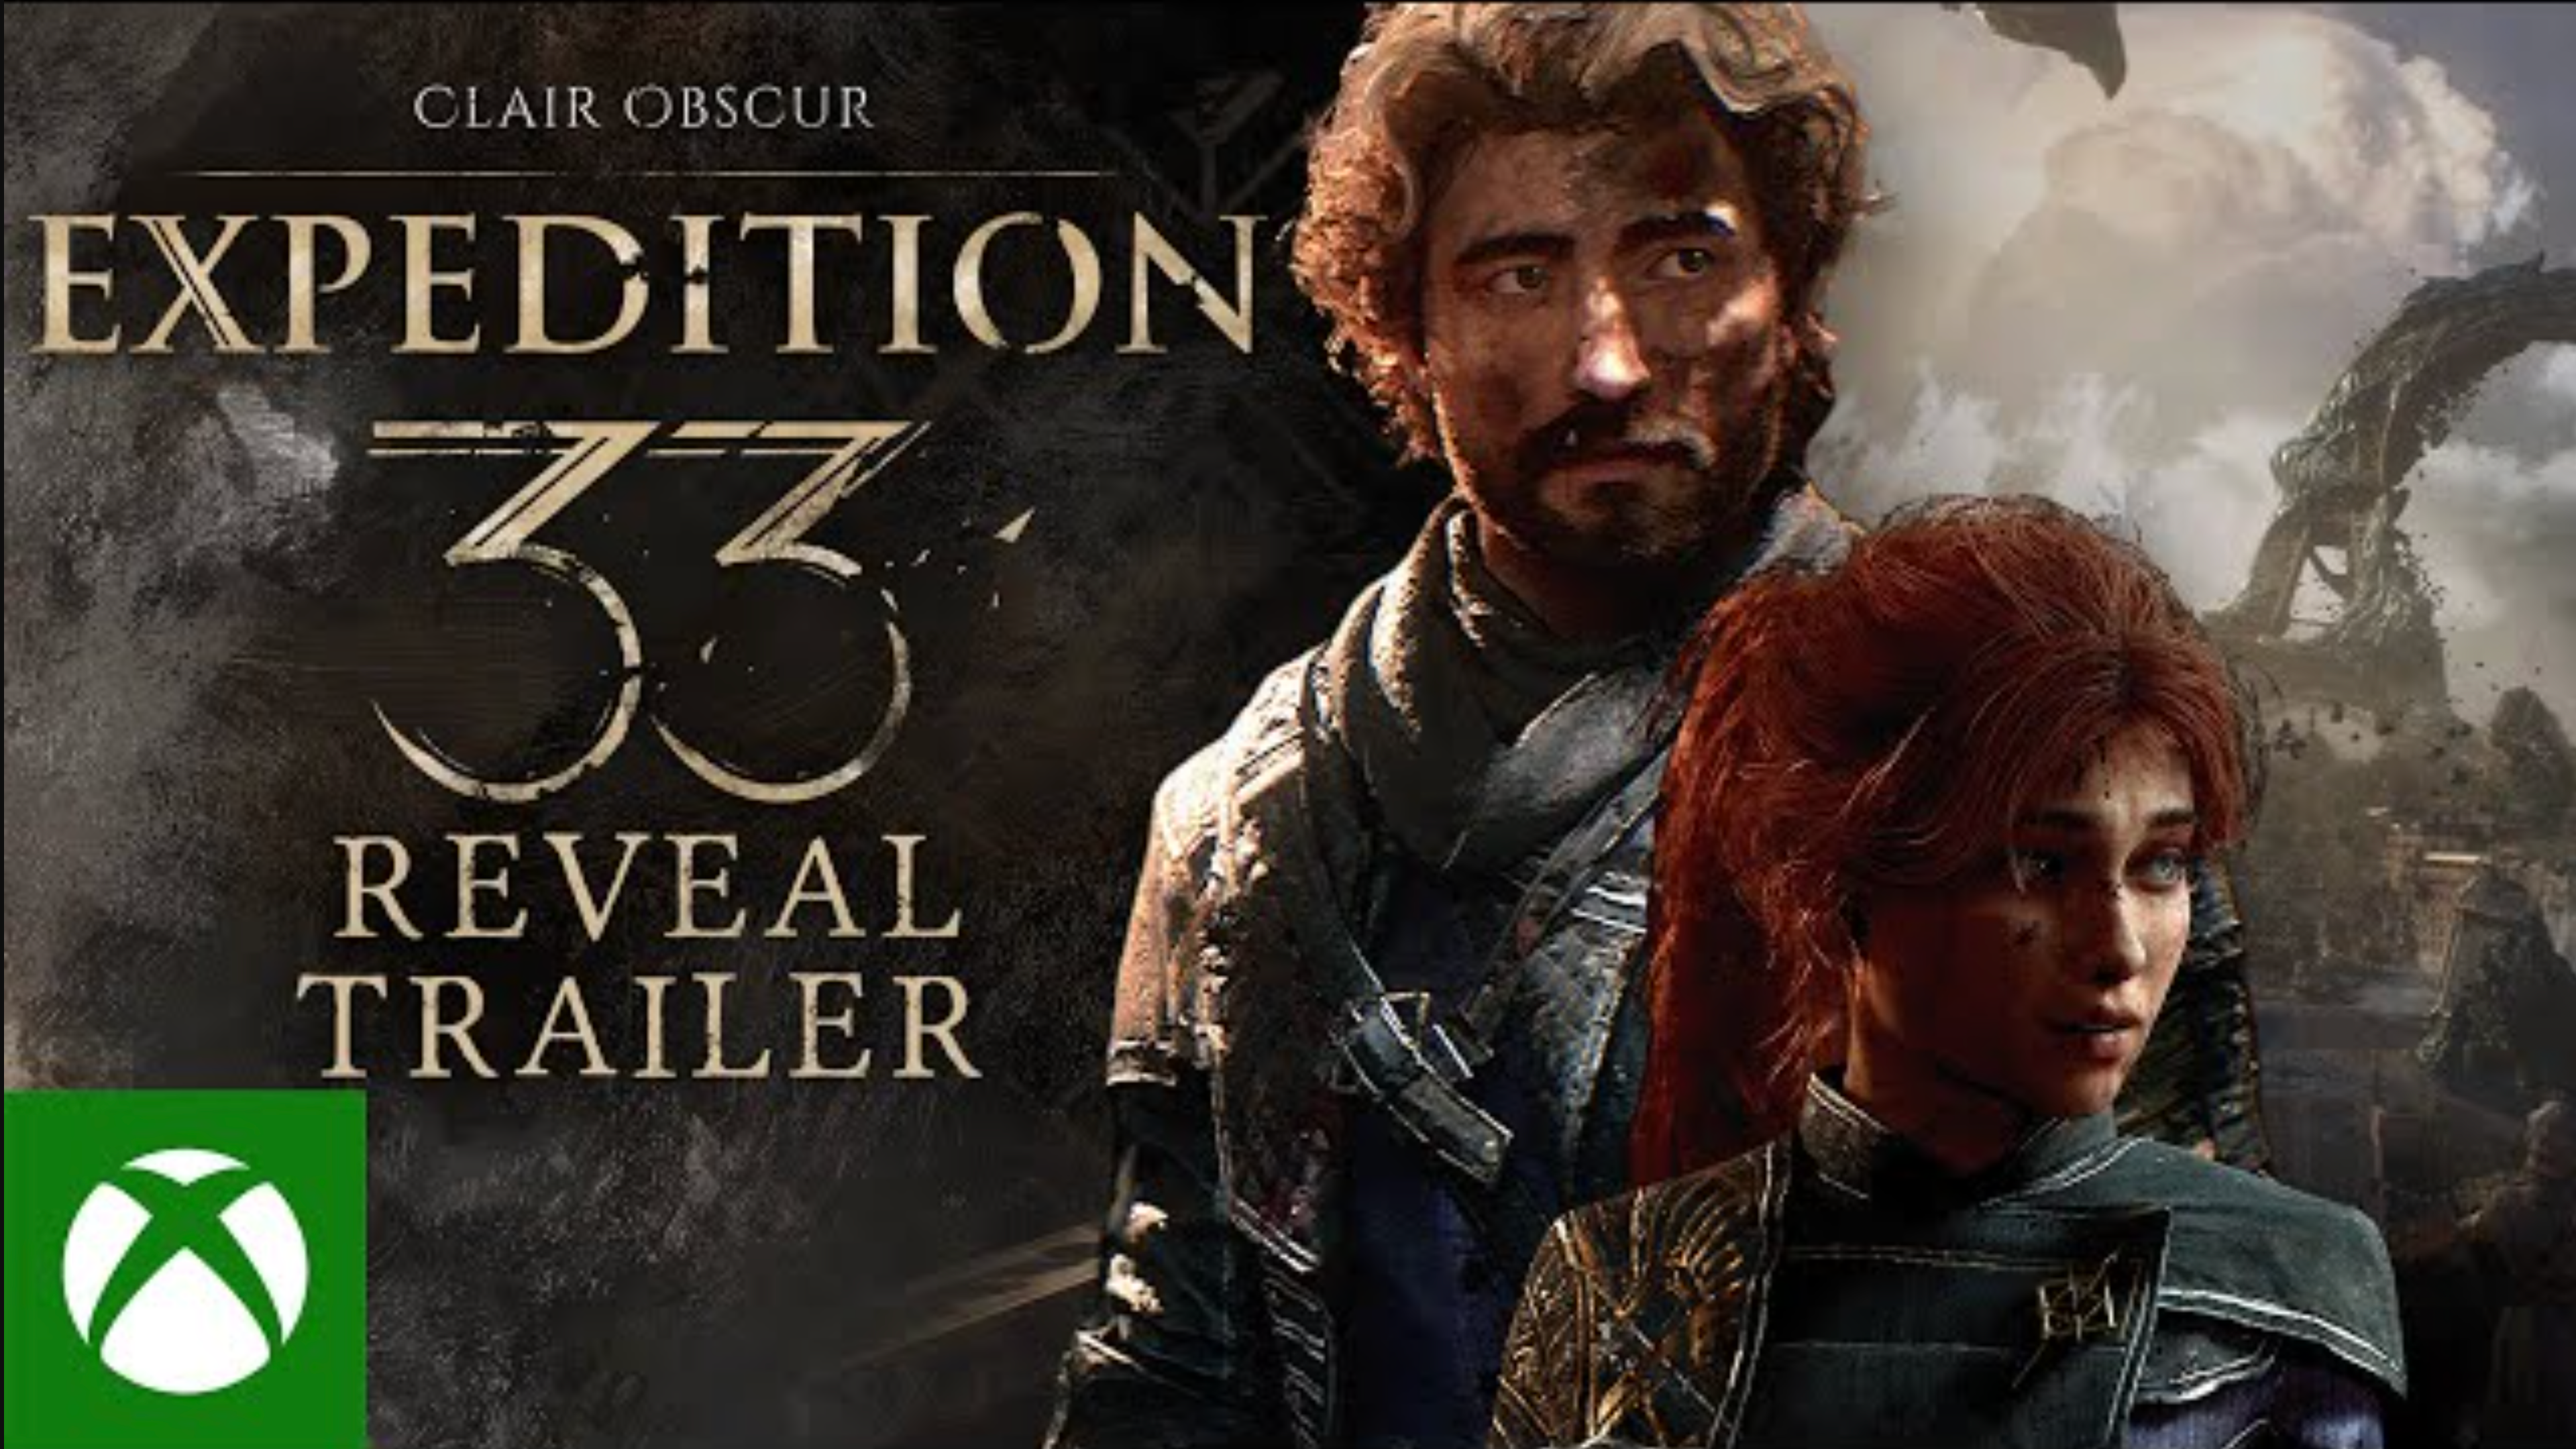 Clair-Obscur-Expedition-33-Reveal-Trailer